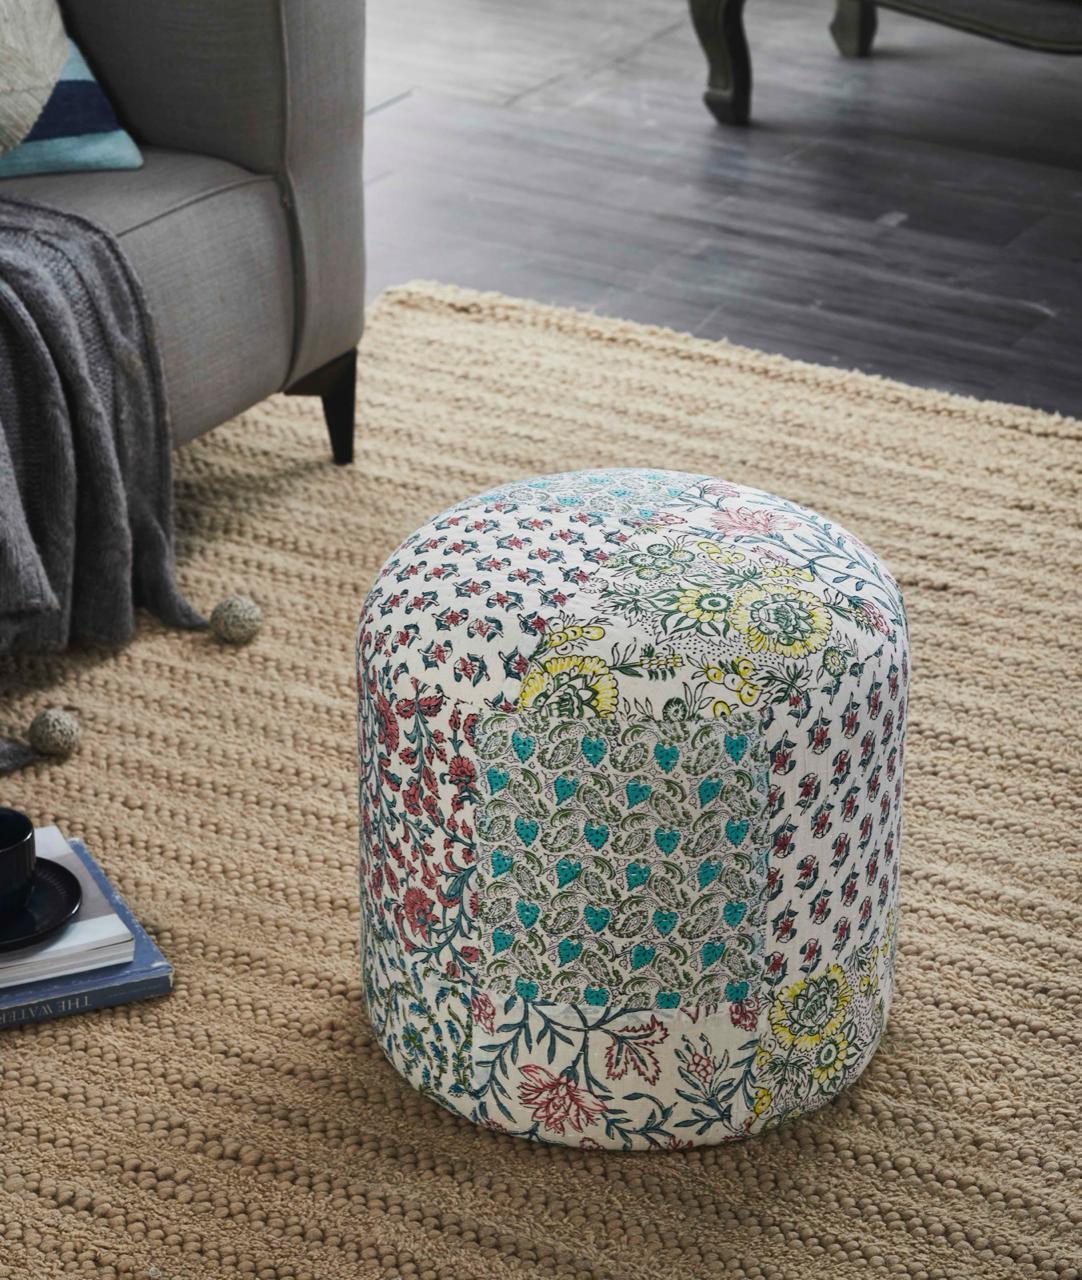 Modern, Traditional Ottoman P100 Round Pouf 718852653274 718852653274 in Blue Fabric